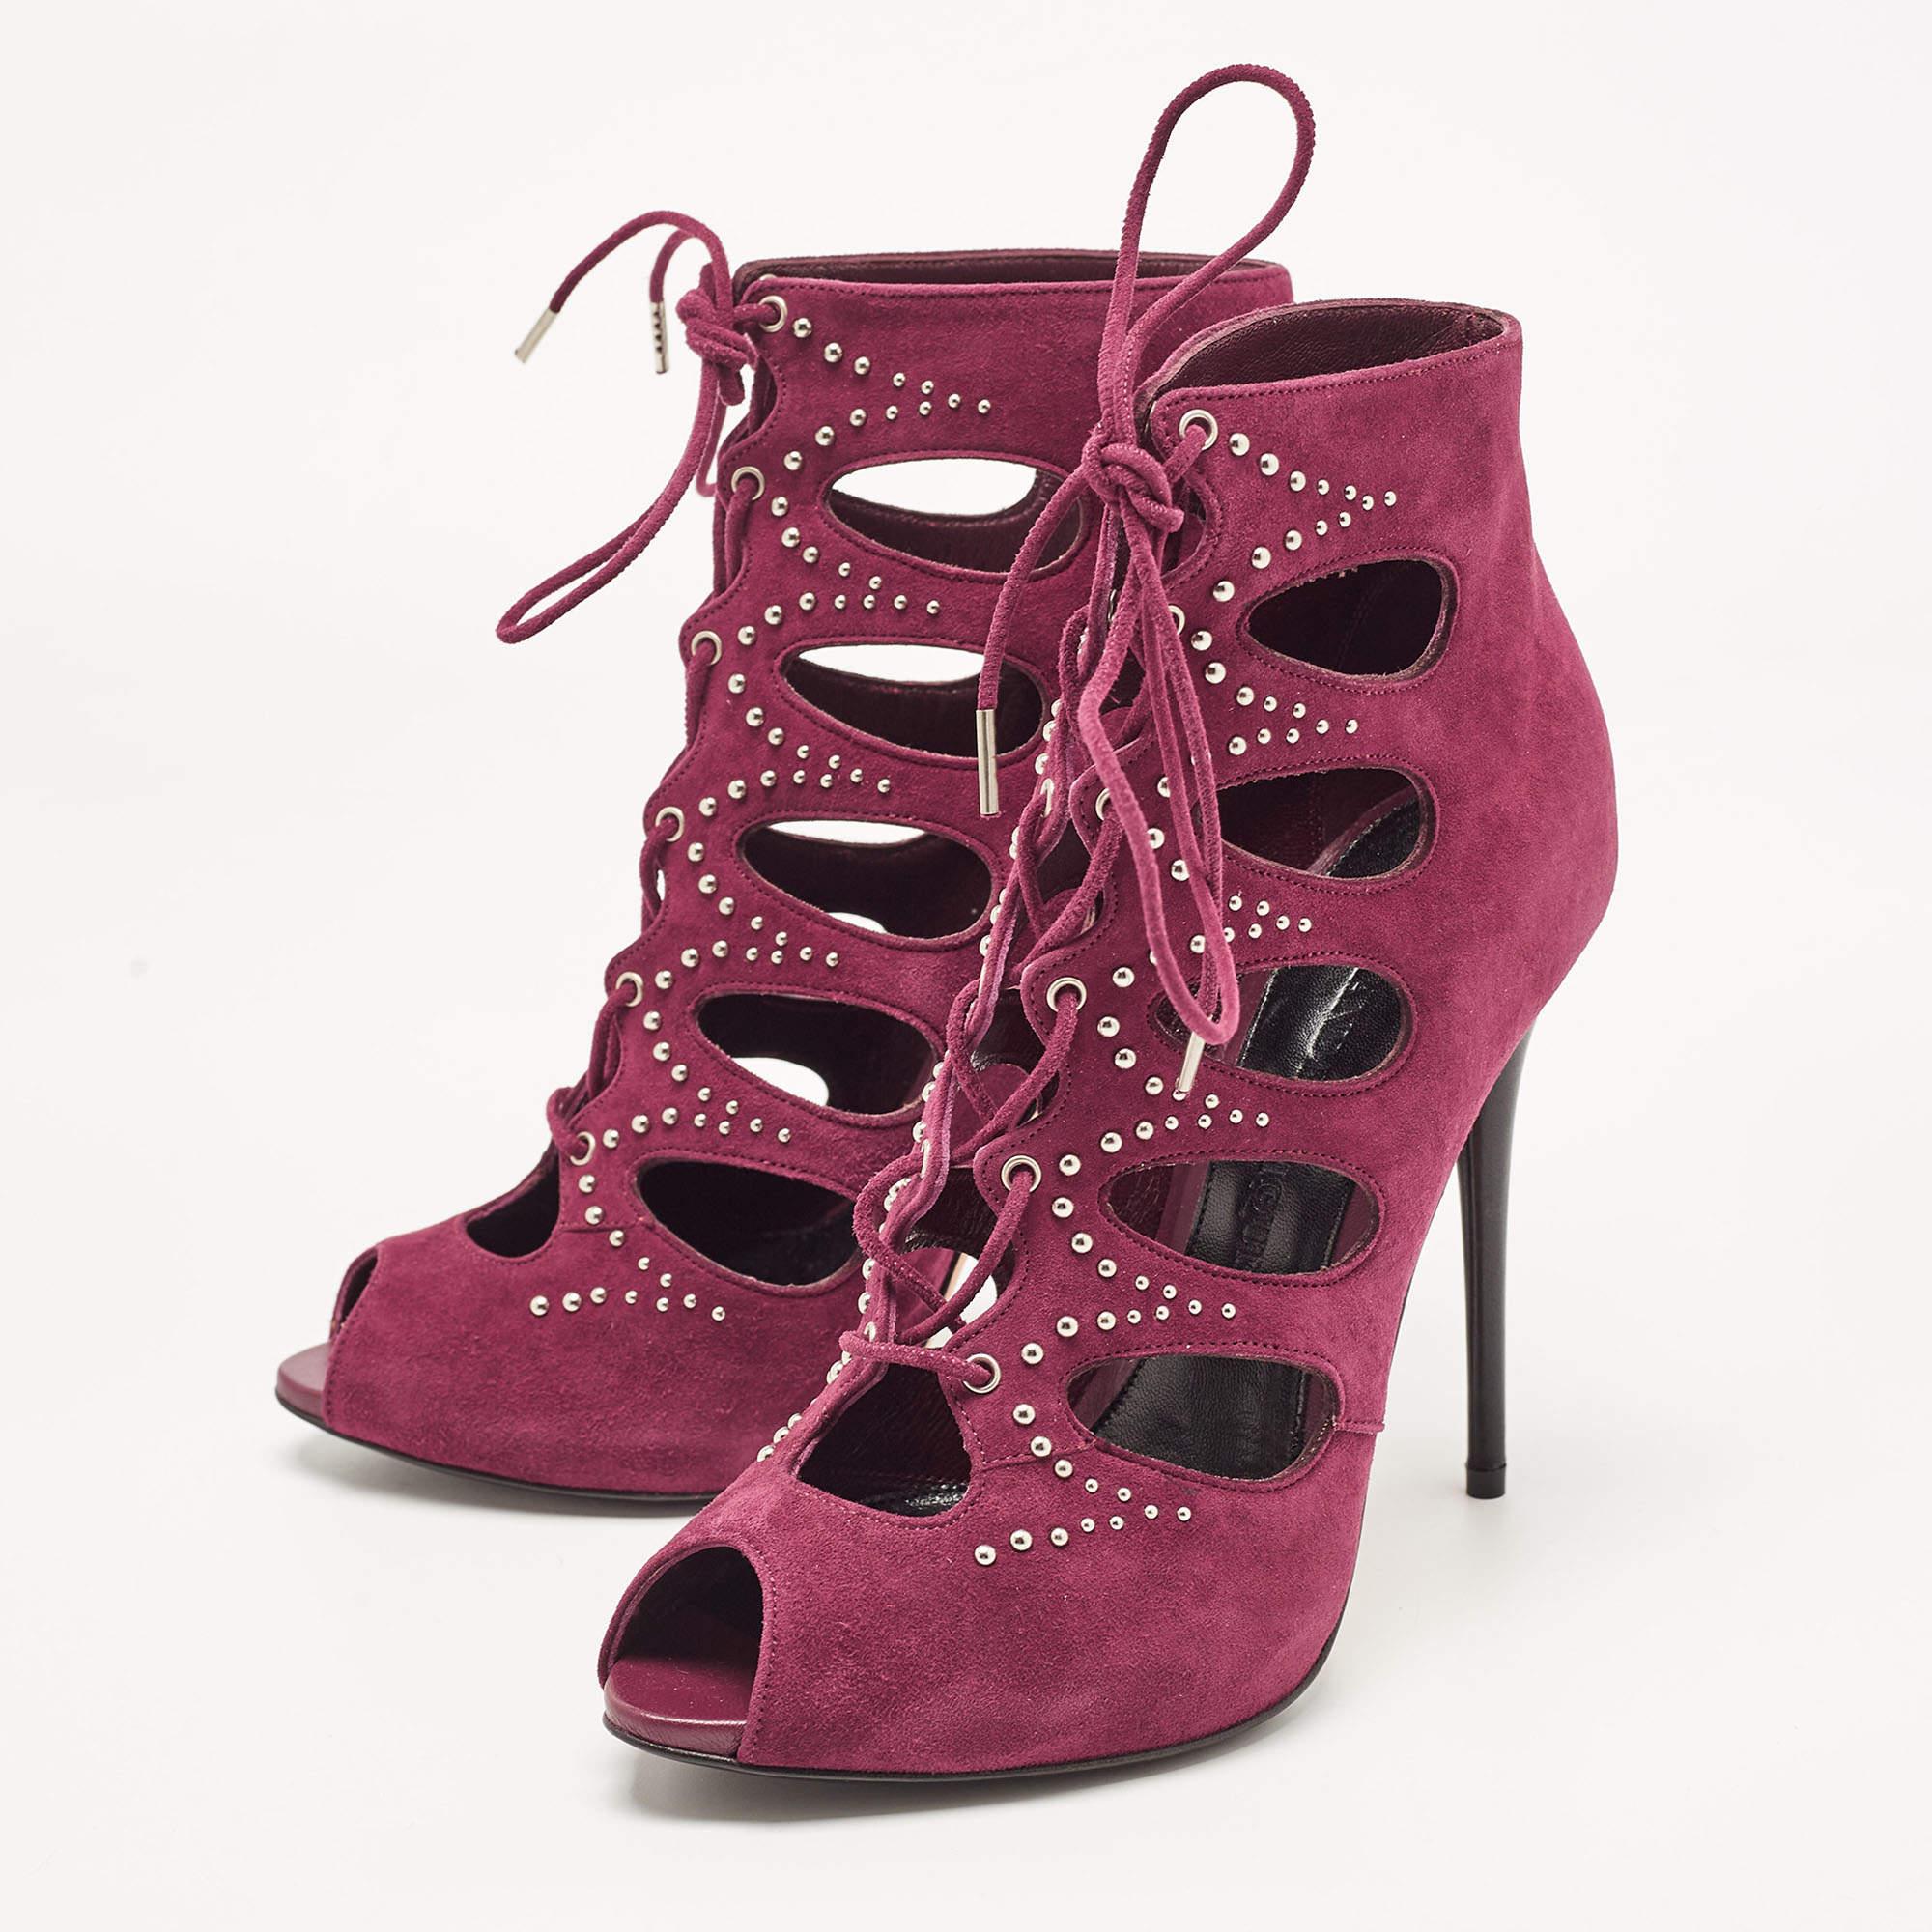 Alexander McQueen Burgundy Suede Cut Out Studded Booties Size 37 1